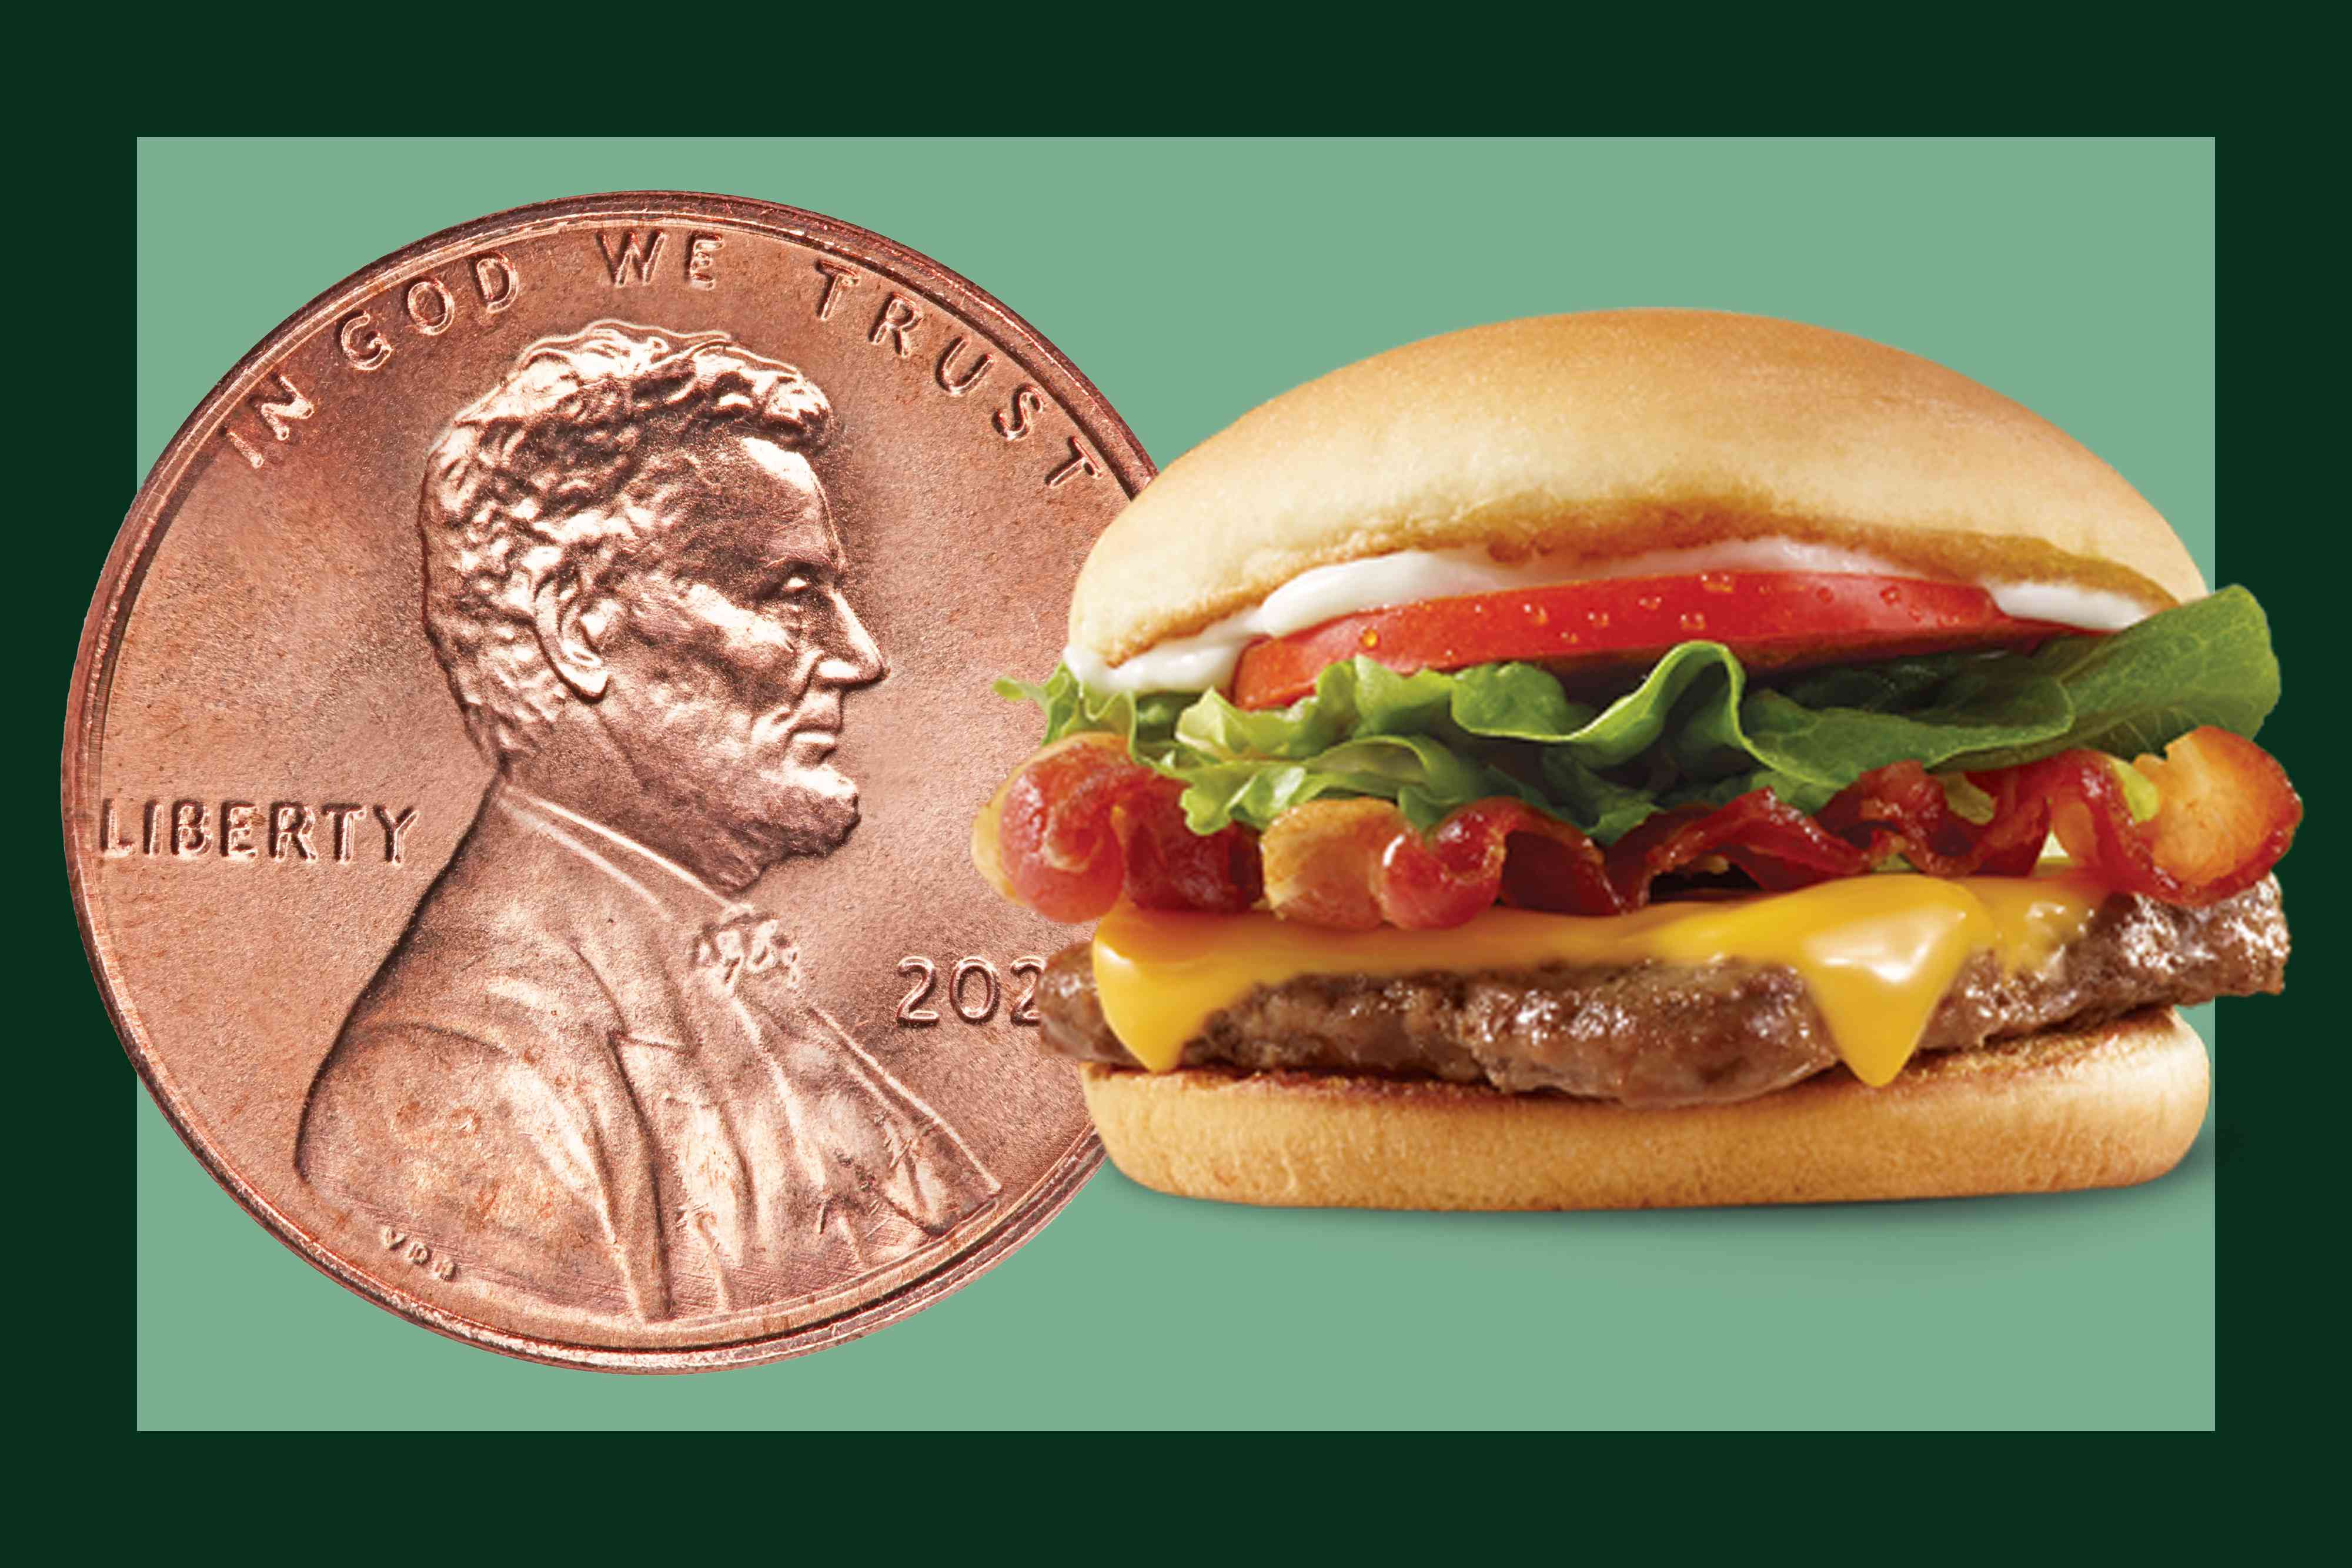 Wendy’s Jr. Bacon Cheeseburger Will Cost Just 1 Cent for a Limited Time